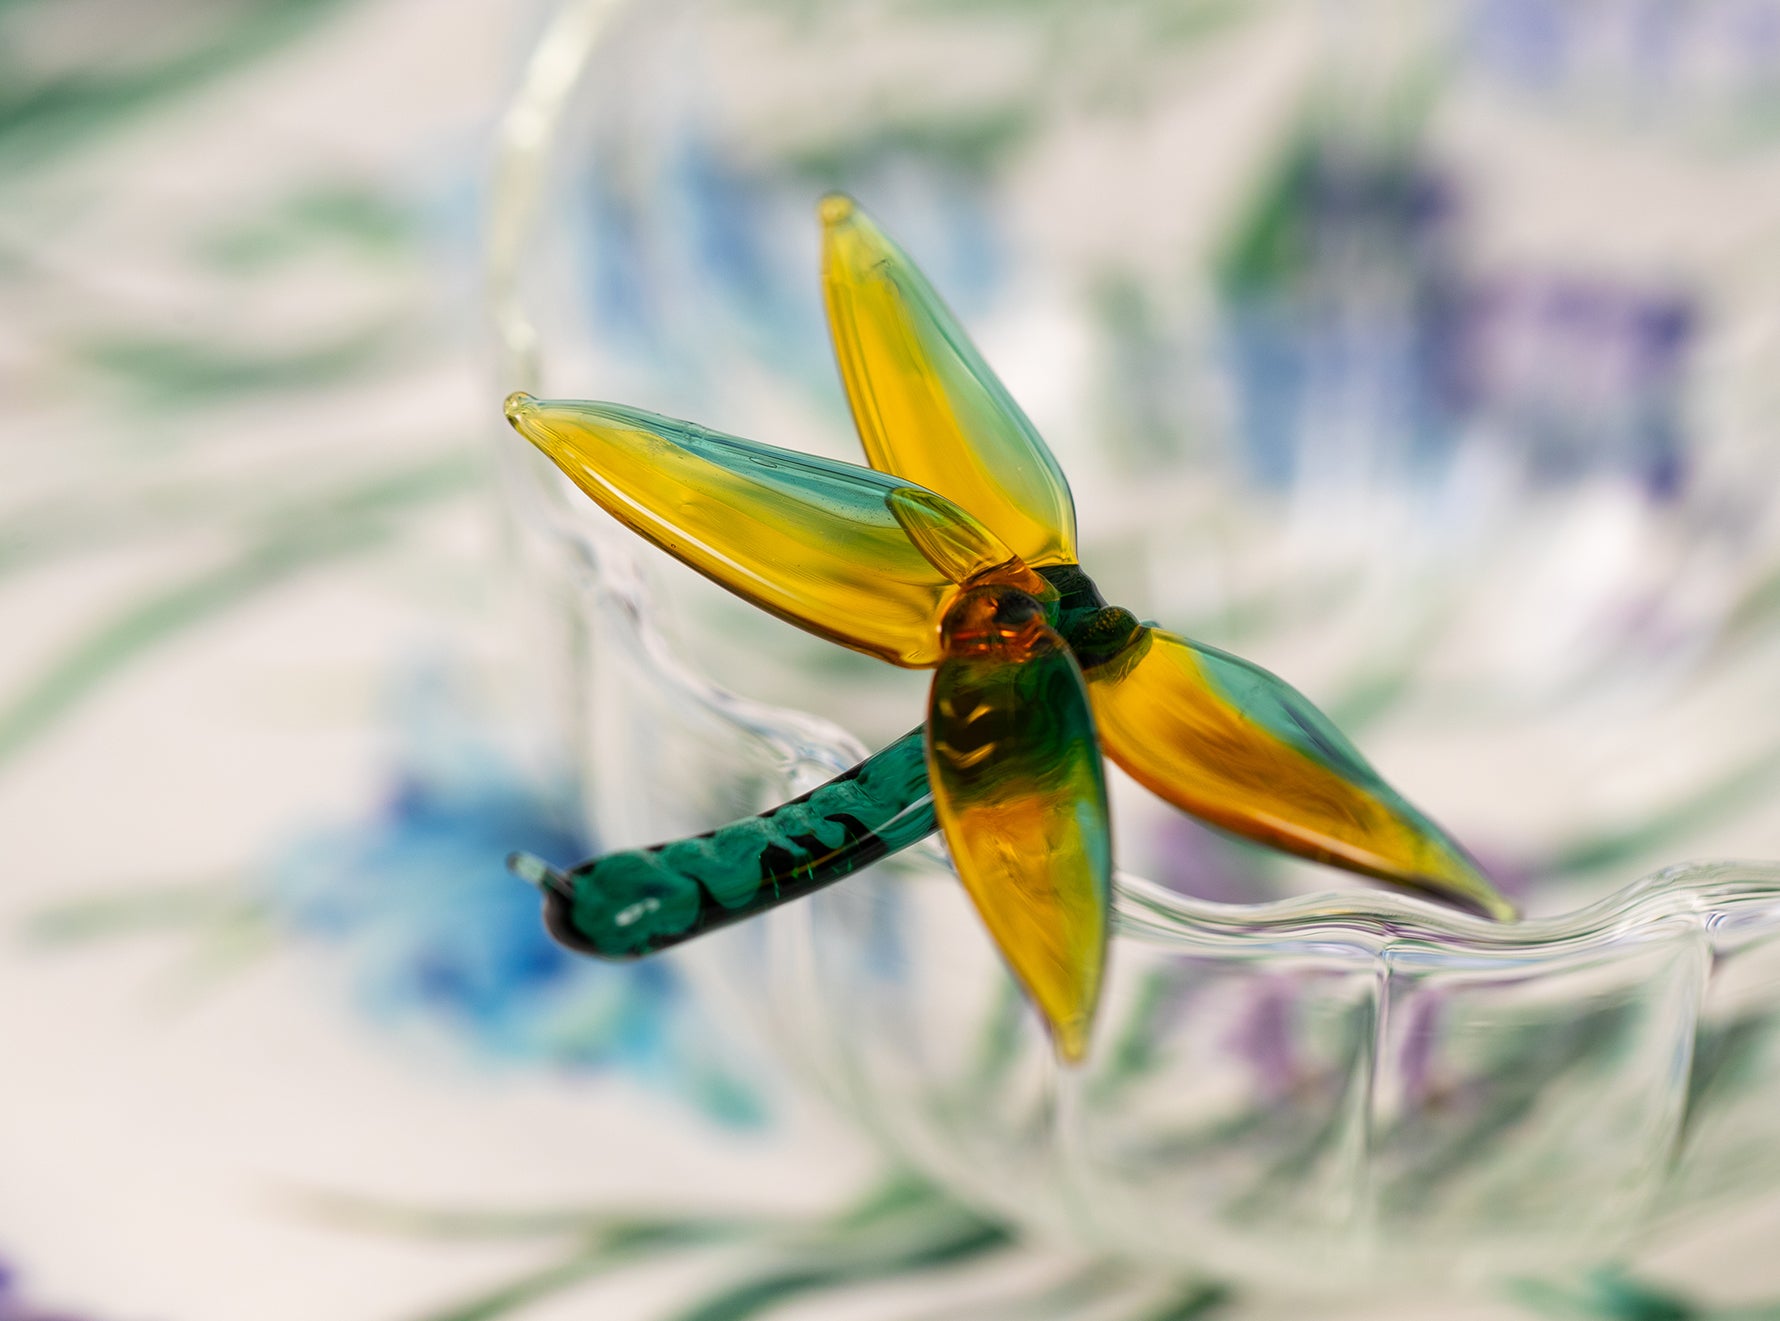 S&B Exclusive Handblown Glass Dragonfly Napkin Ring in Green & Yellow